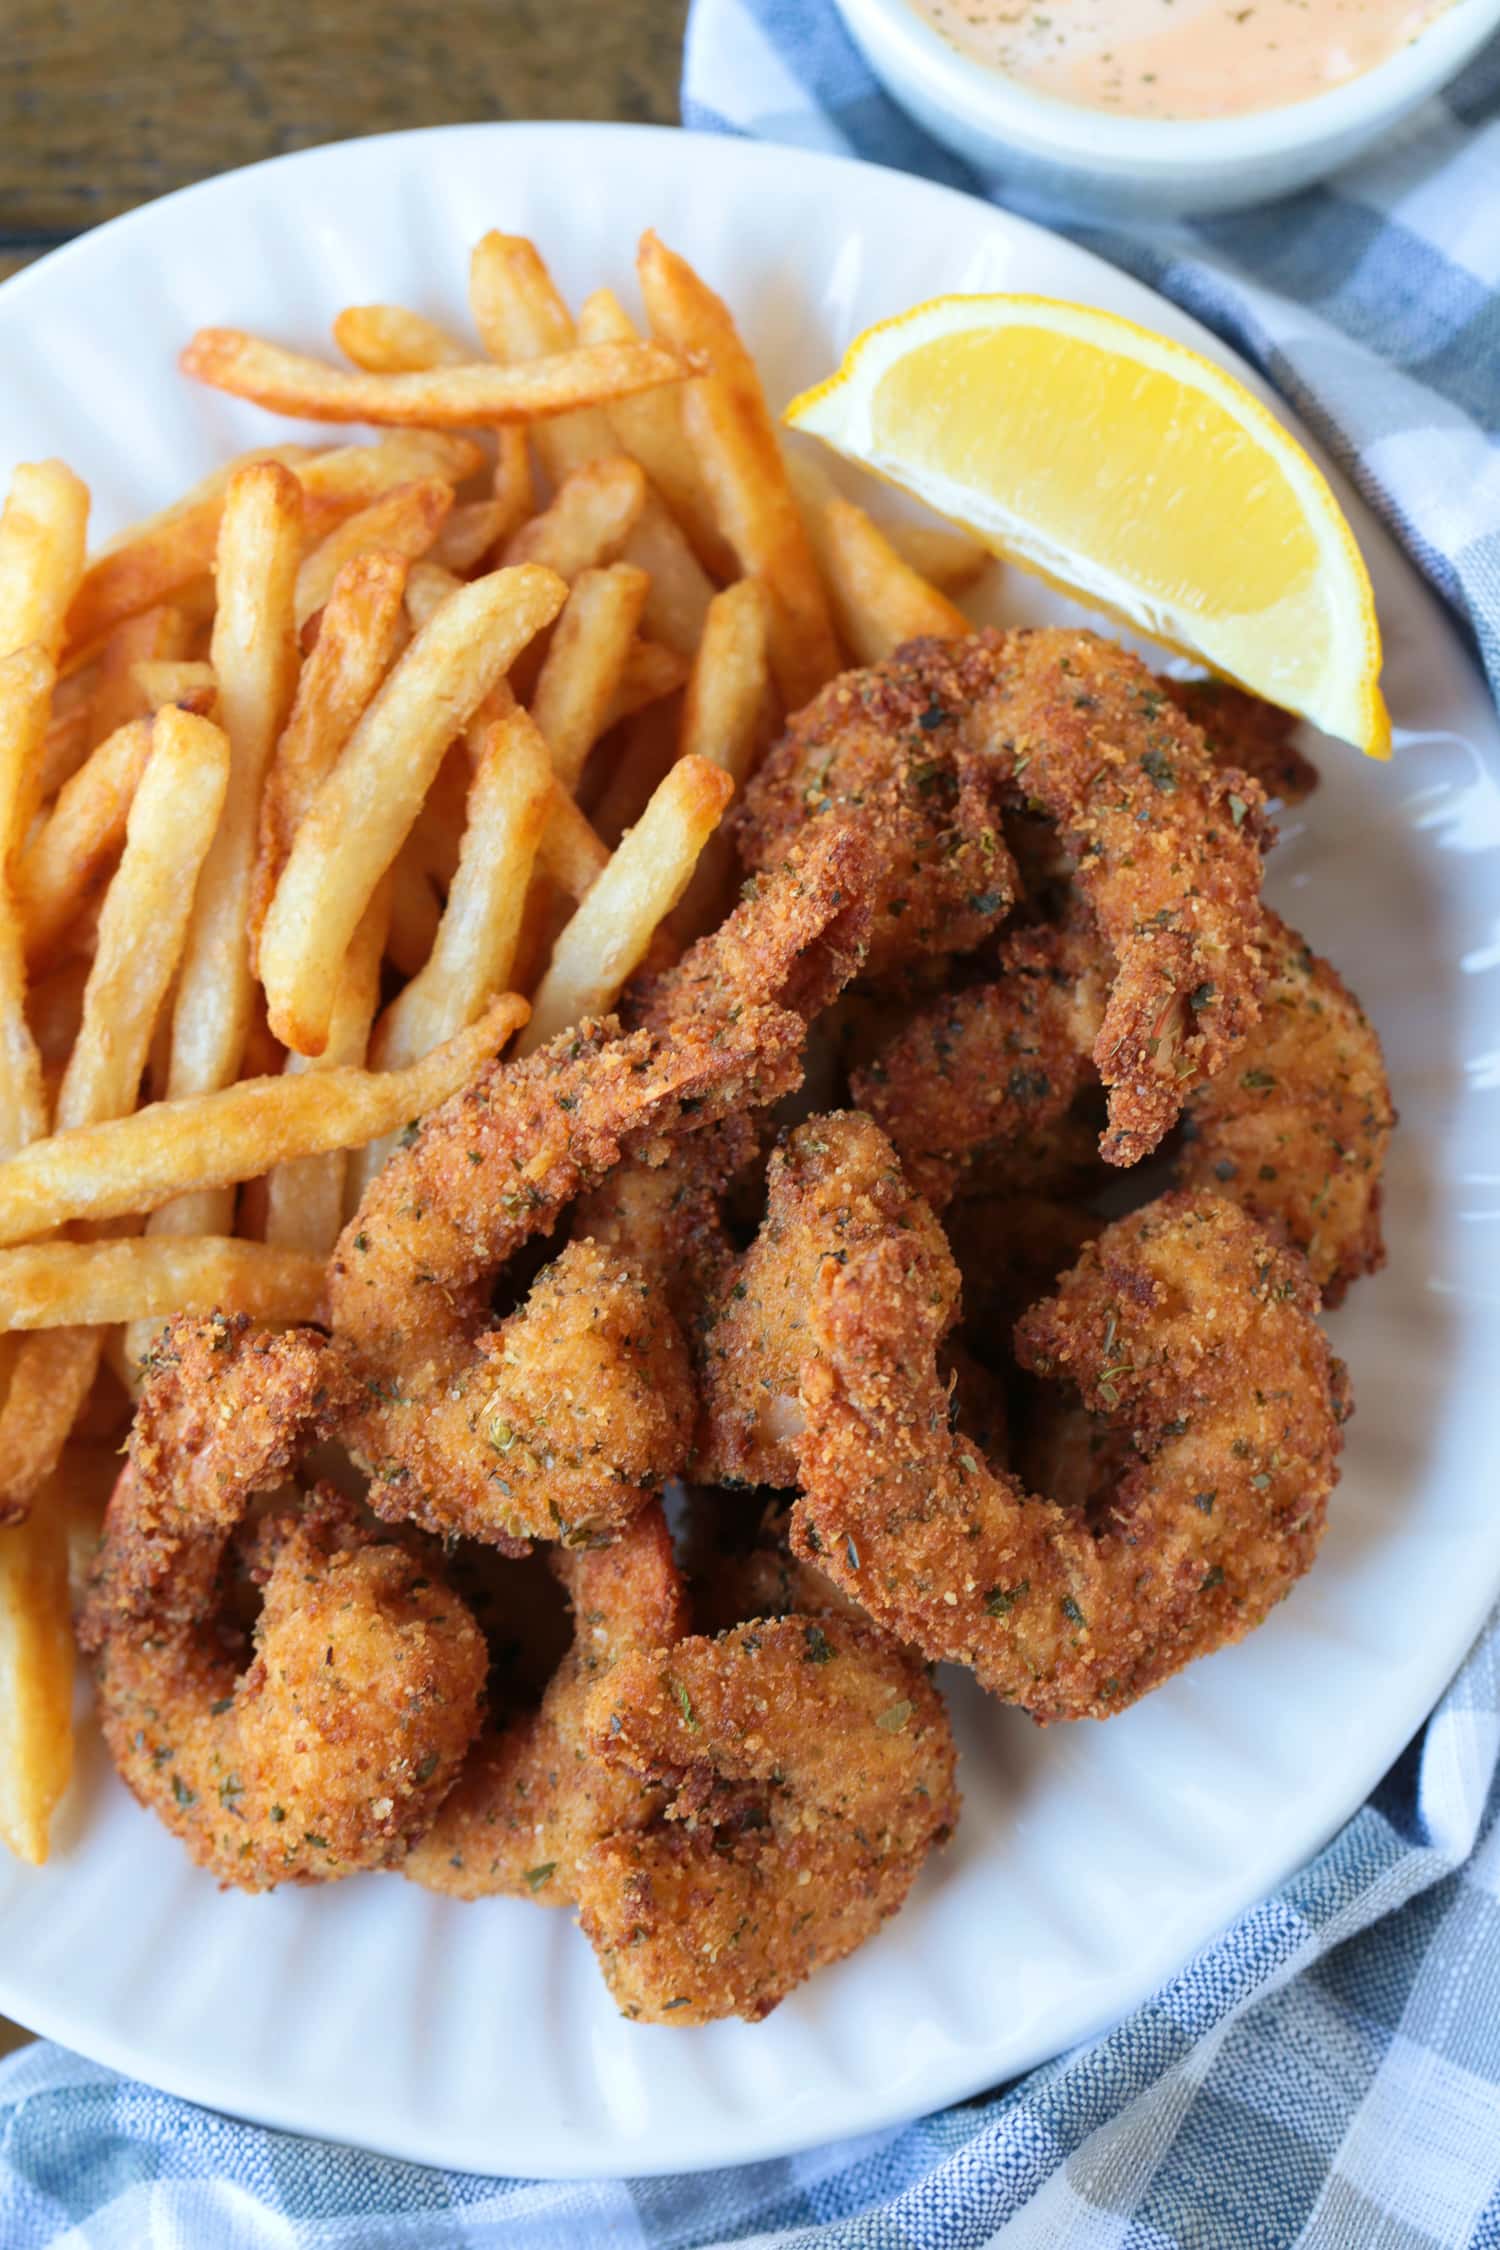 breaded shrimp on a plate with fries and lemon wedge